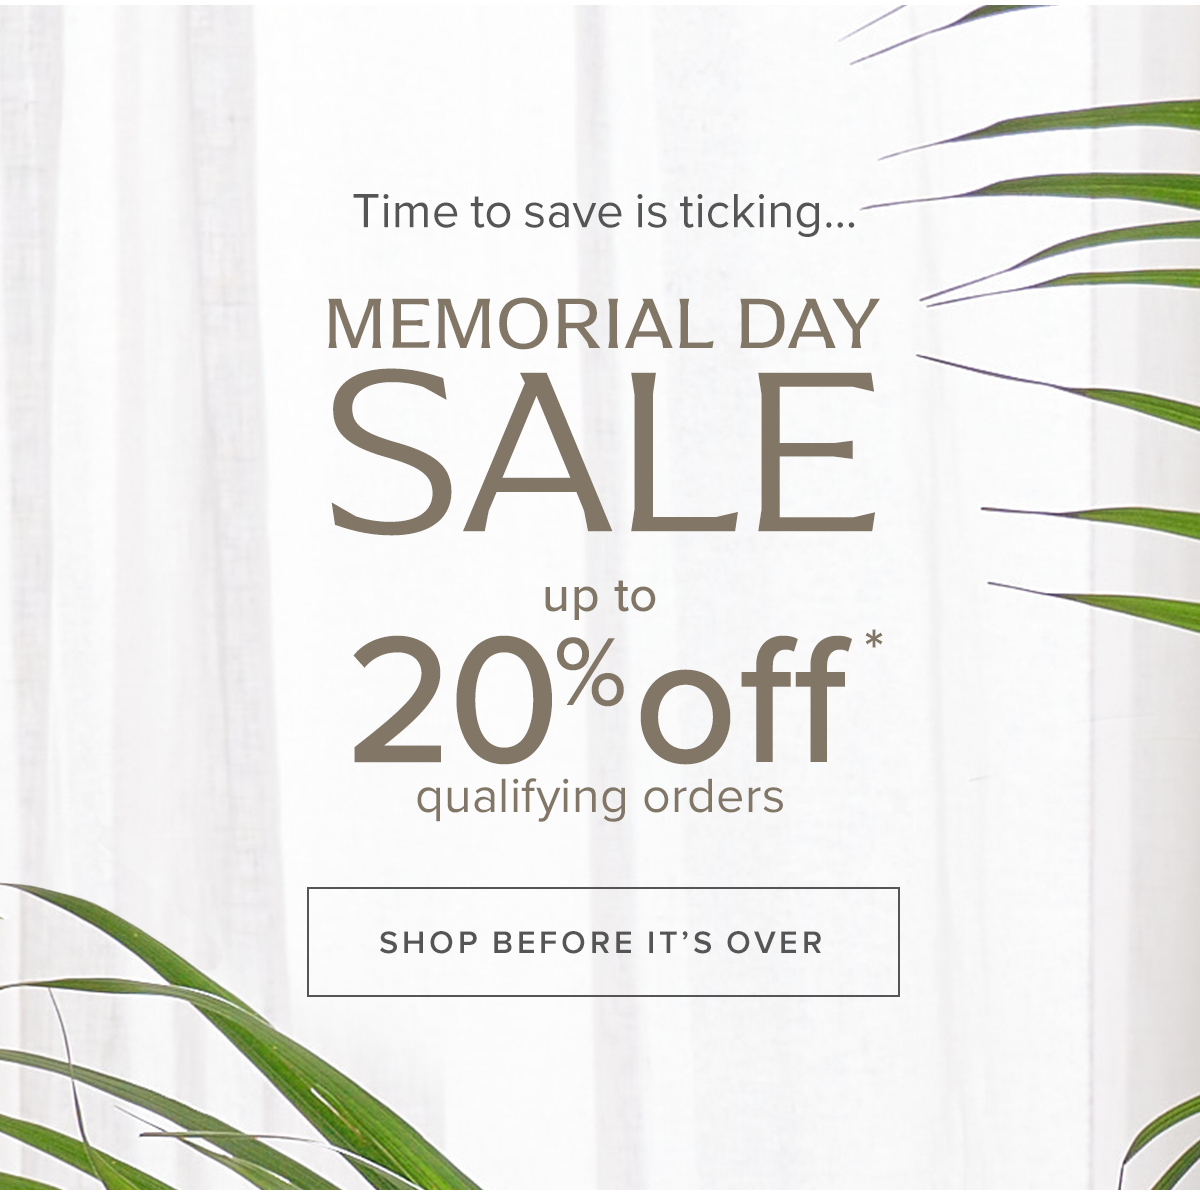 Time to save is ticking... | Memorial Day Sale